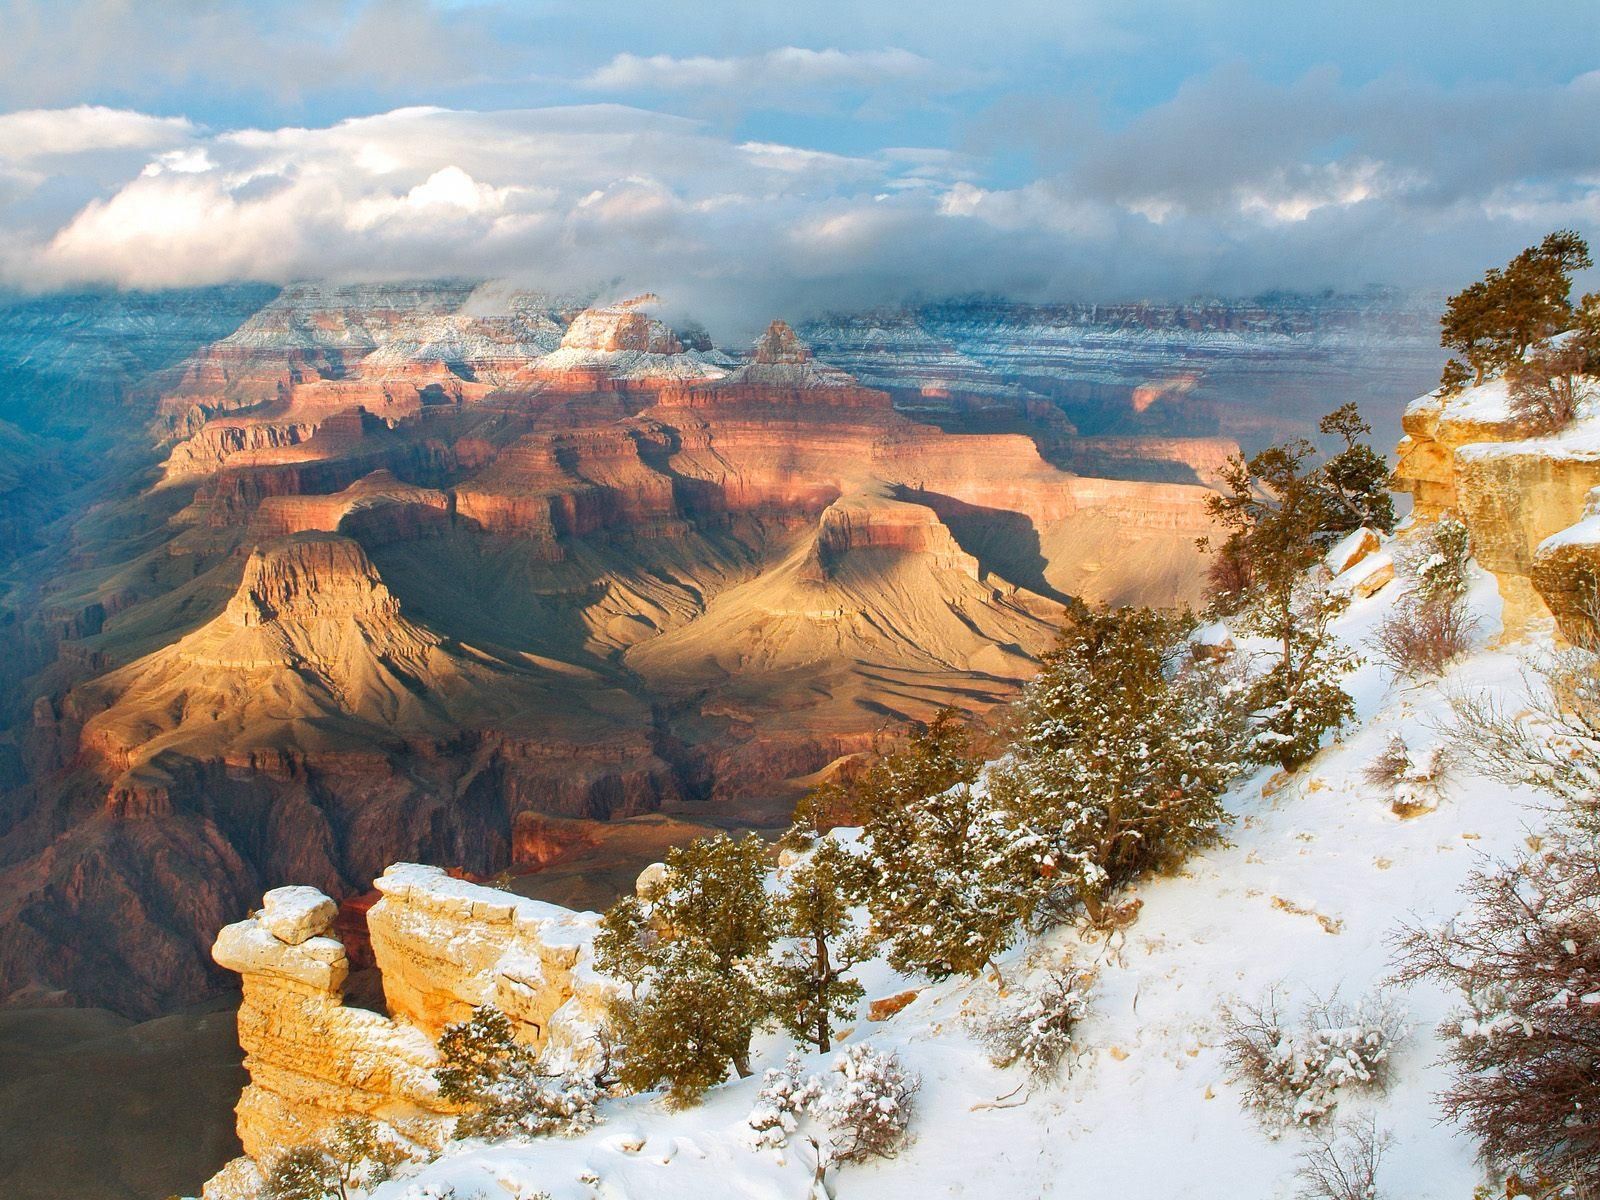 Grand canyon in winter free desktop background wallpaper image. Grand canyon wallpaper, Grand canyon national park arizona, Grand canyon national park